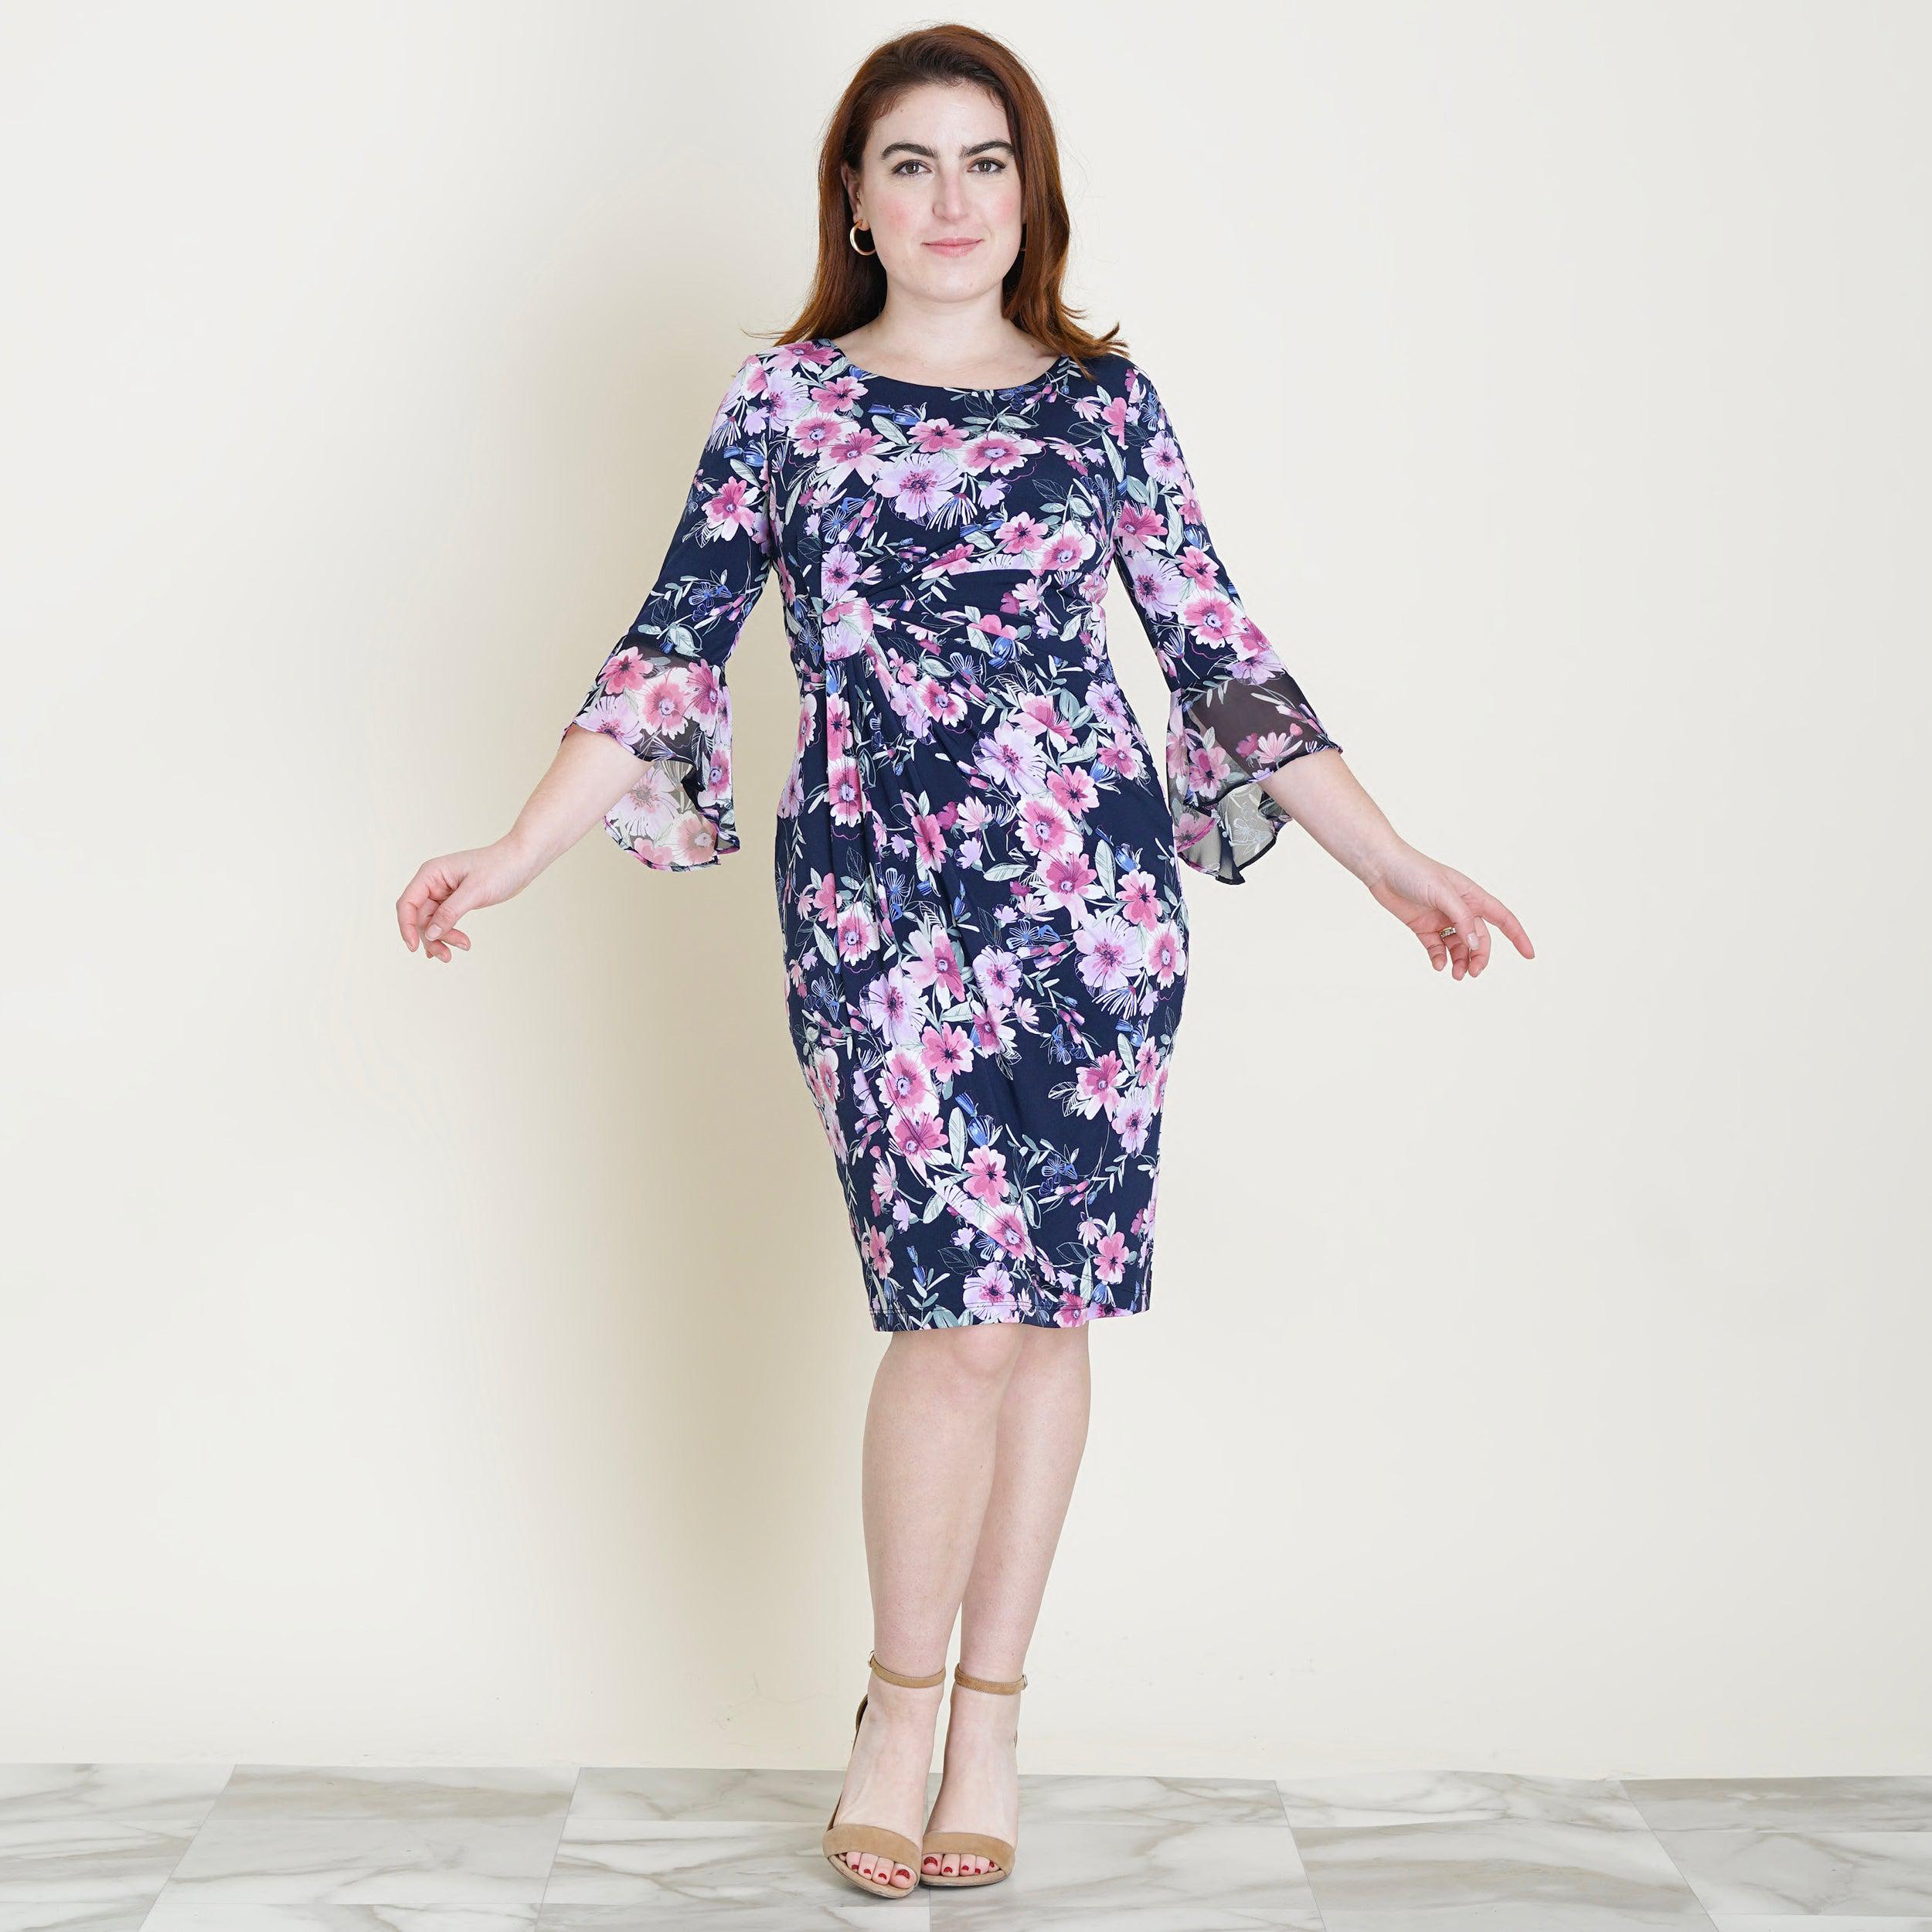 Woman posing wearing Navy/Mauve Lisa 2.0 Navy and Mauve Floral Faux Wrap Dress from Connected Apparel